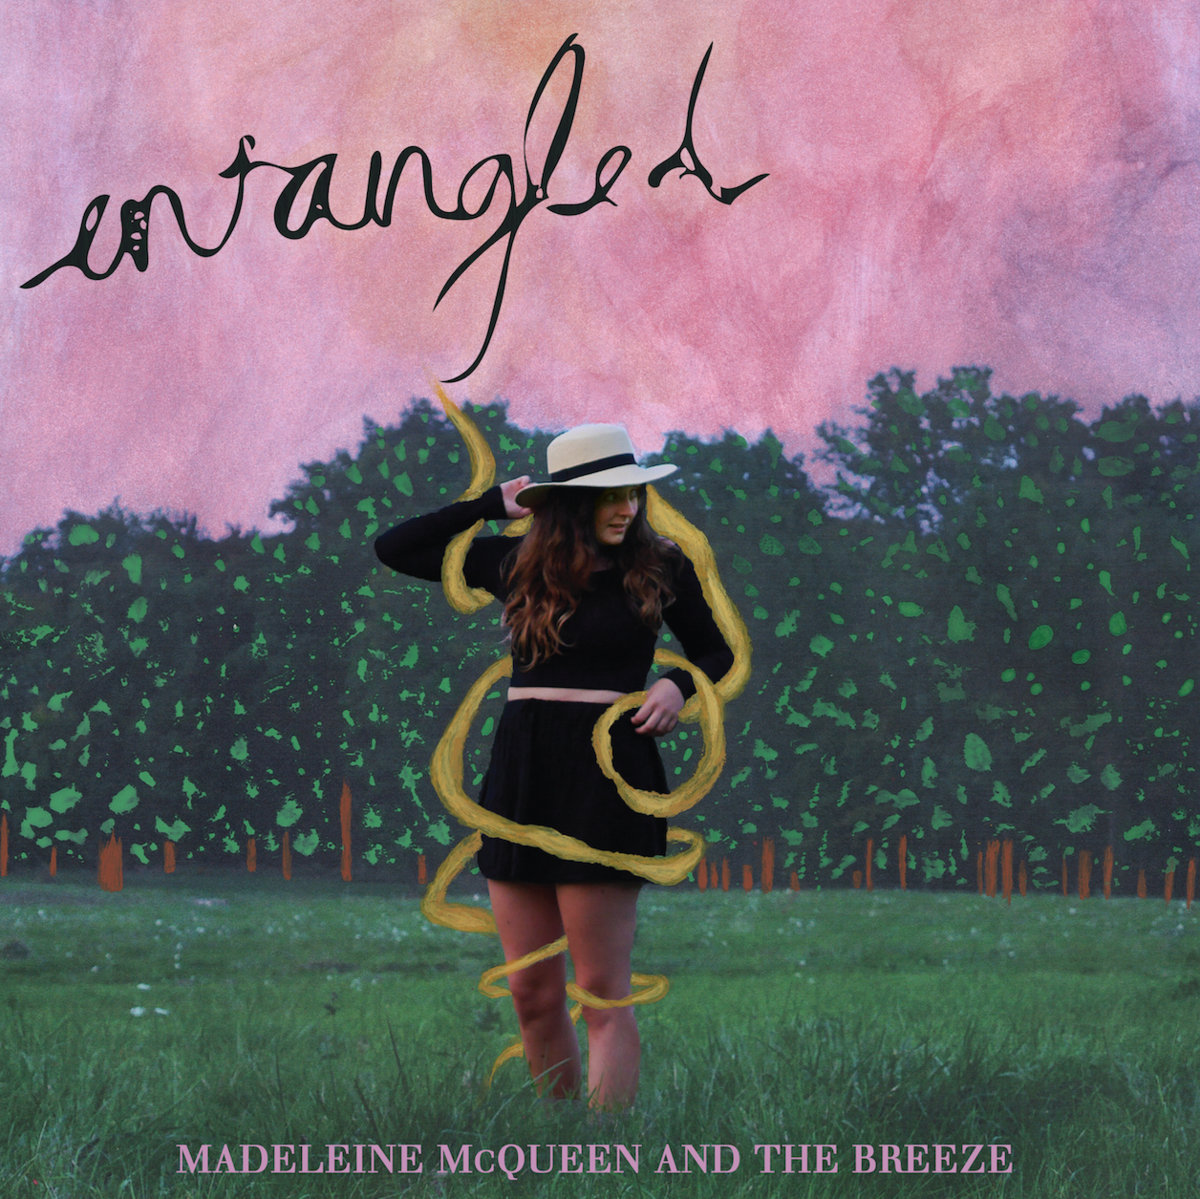 Madeleine McQueen and the Breeze Release Impressive EP